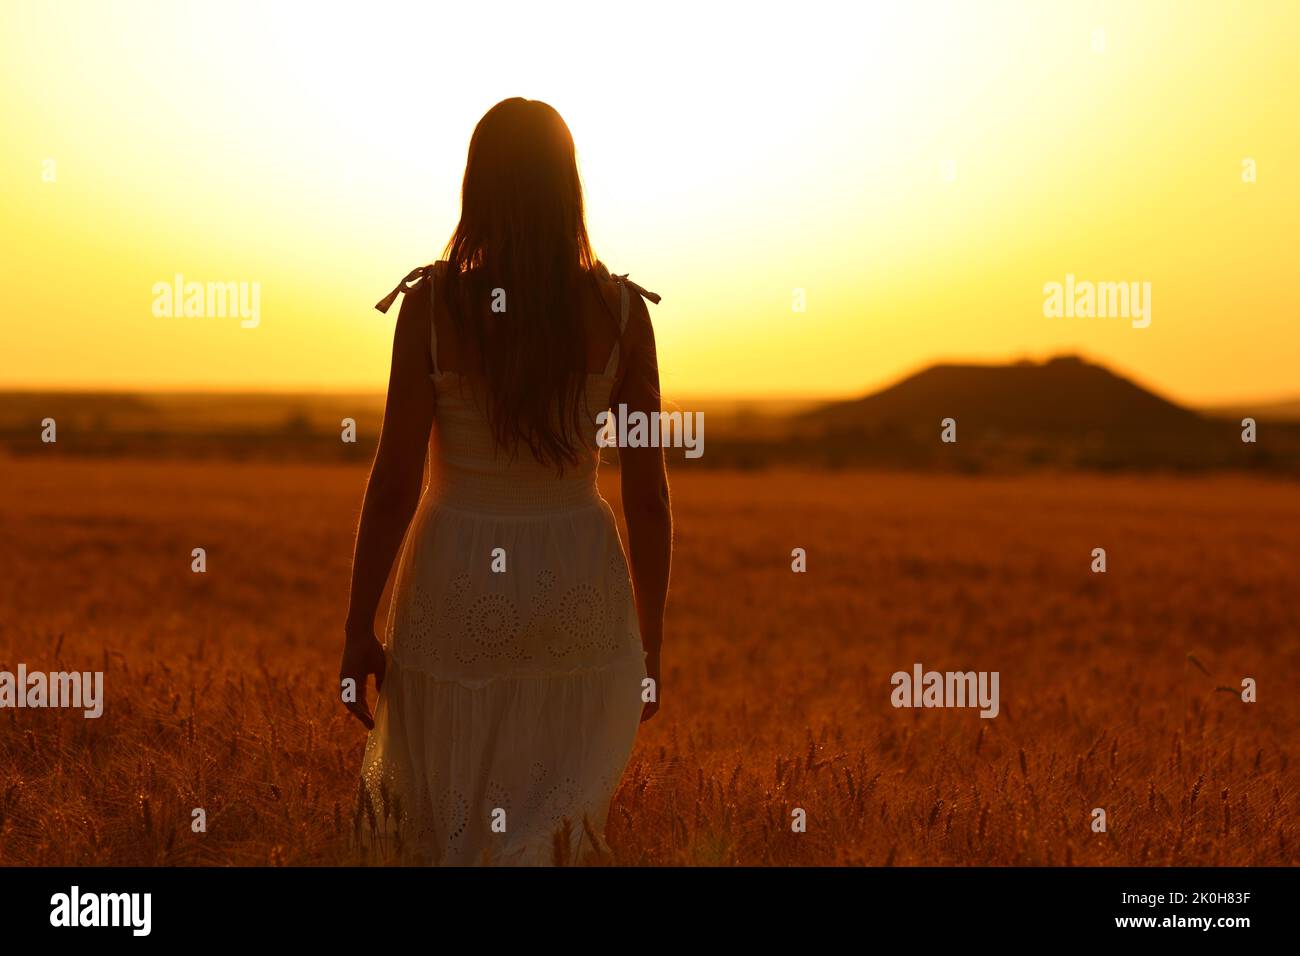 Back view portrait of a woman silhouette walking in a wheat field at sunset Stock Photo